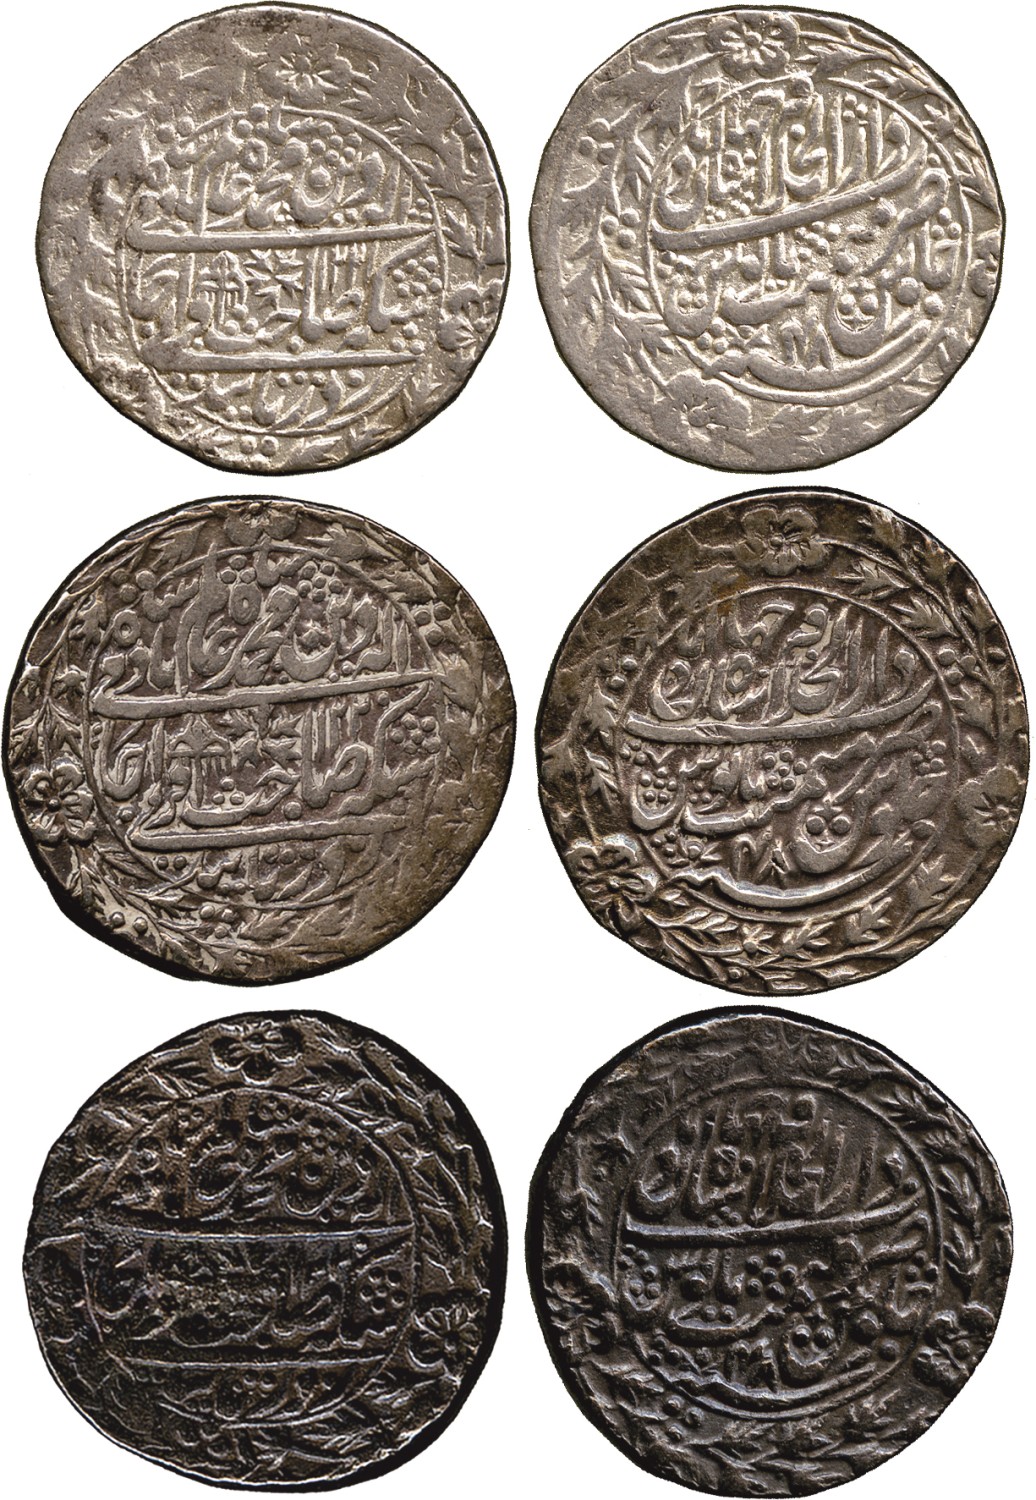 † Coins of India. Mughal. Shah ‘Alam II/ East India Company, Silver Rupees (3), Shahjahanabad, AH